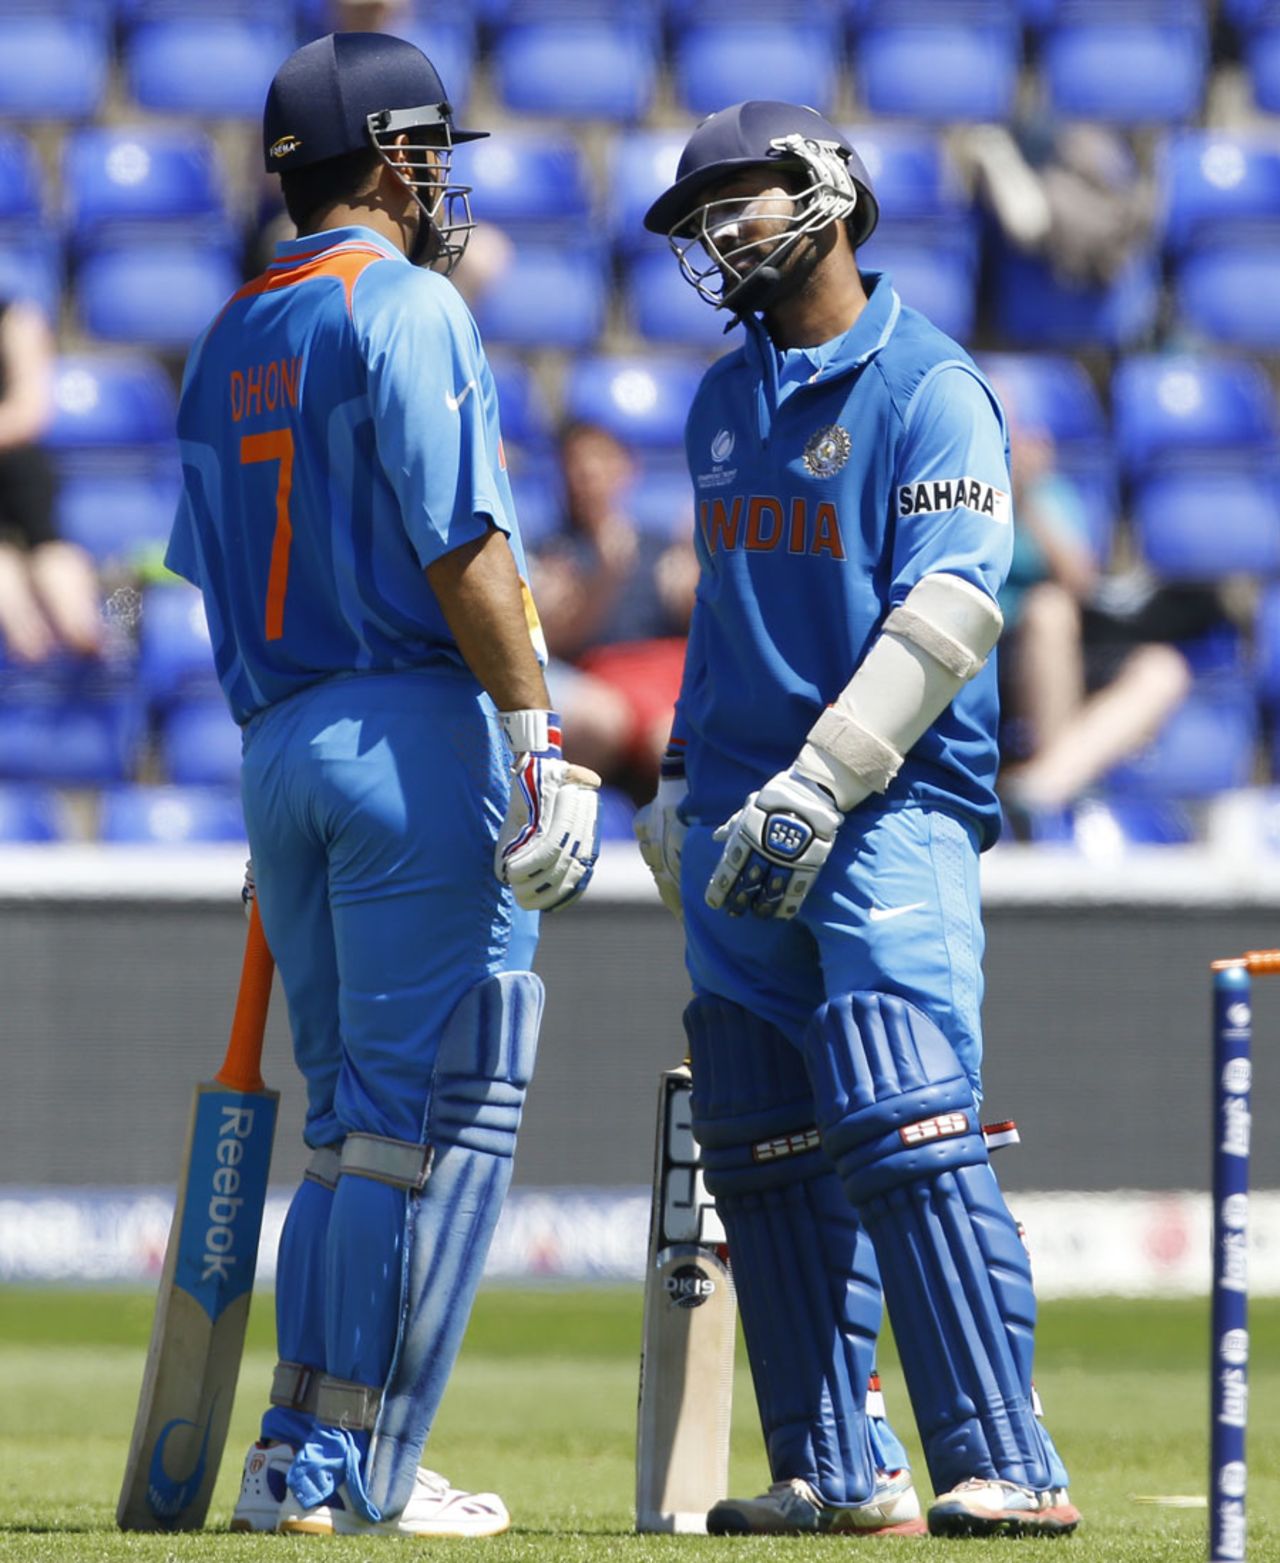 Dinesh Karthik and MS Dhoni take a break between overs, Australia v India, Champions Trophy warm-up, Cardiff, June 4, 2013
